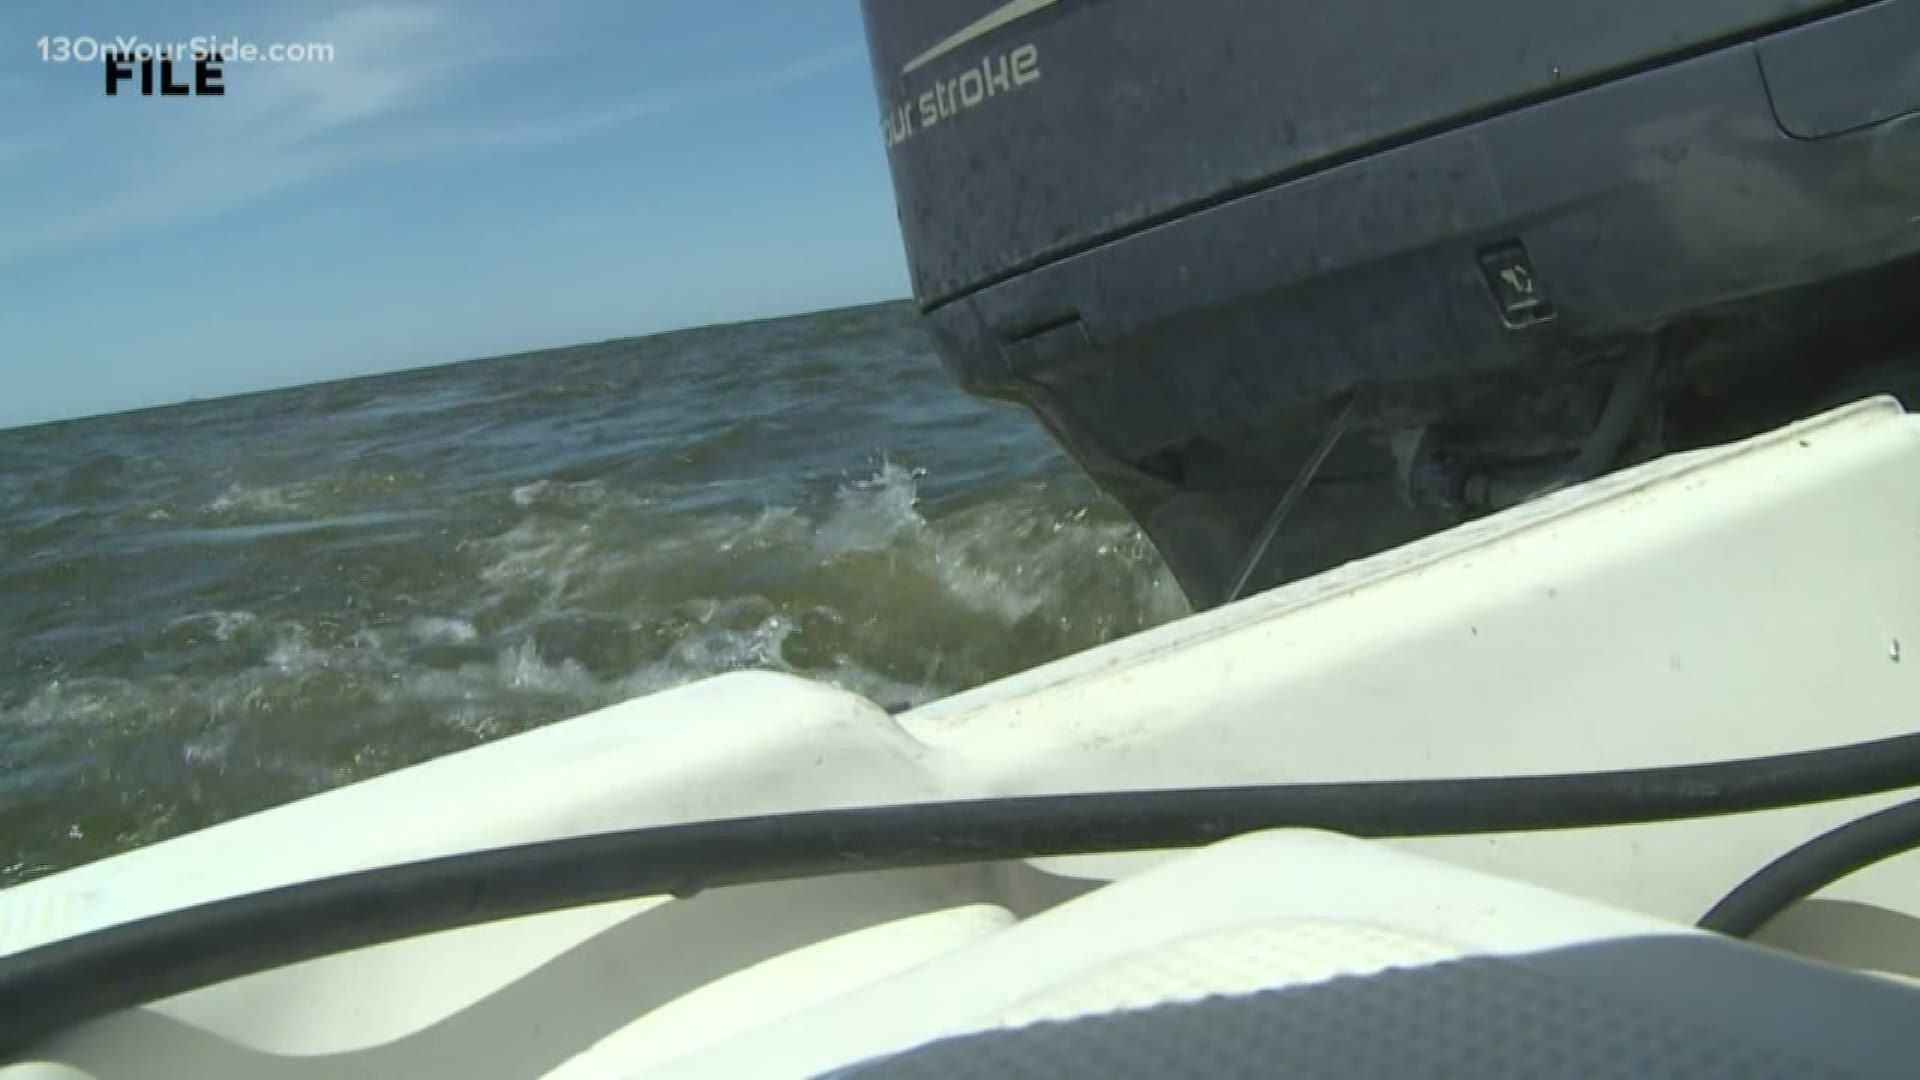 They've introduced a bill allowing for temporary boating speed limits. For now, the default speed limit is 55 mph.